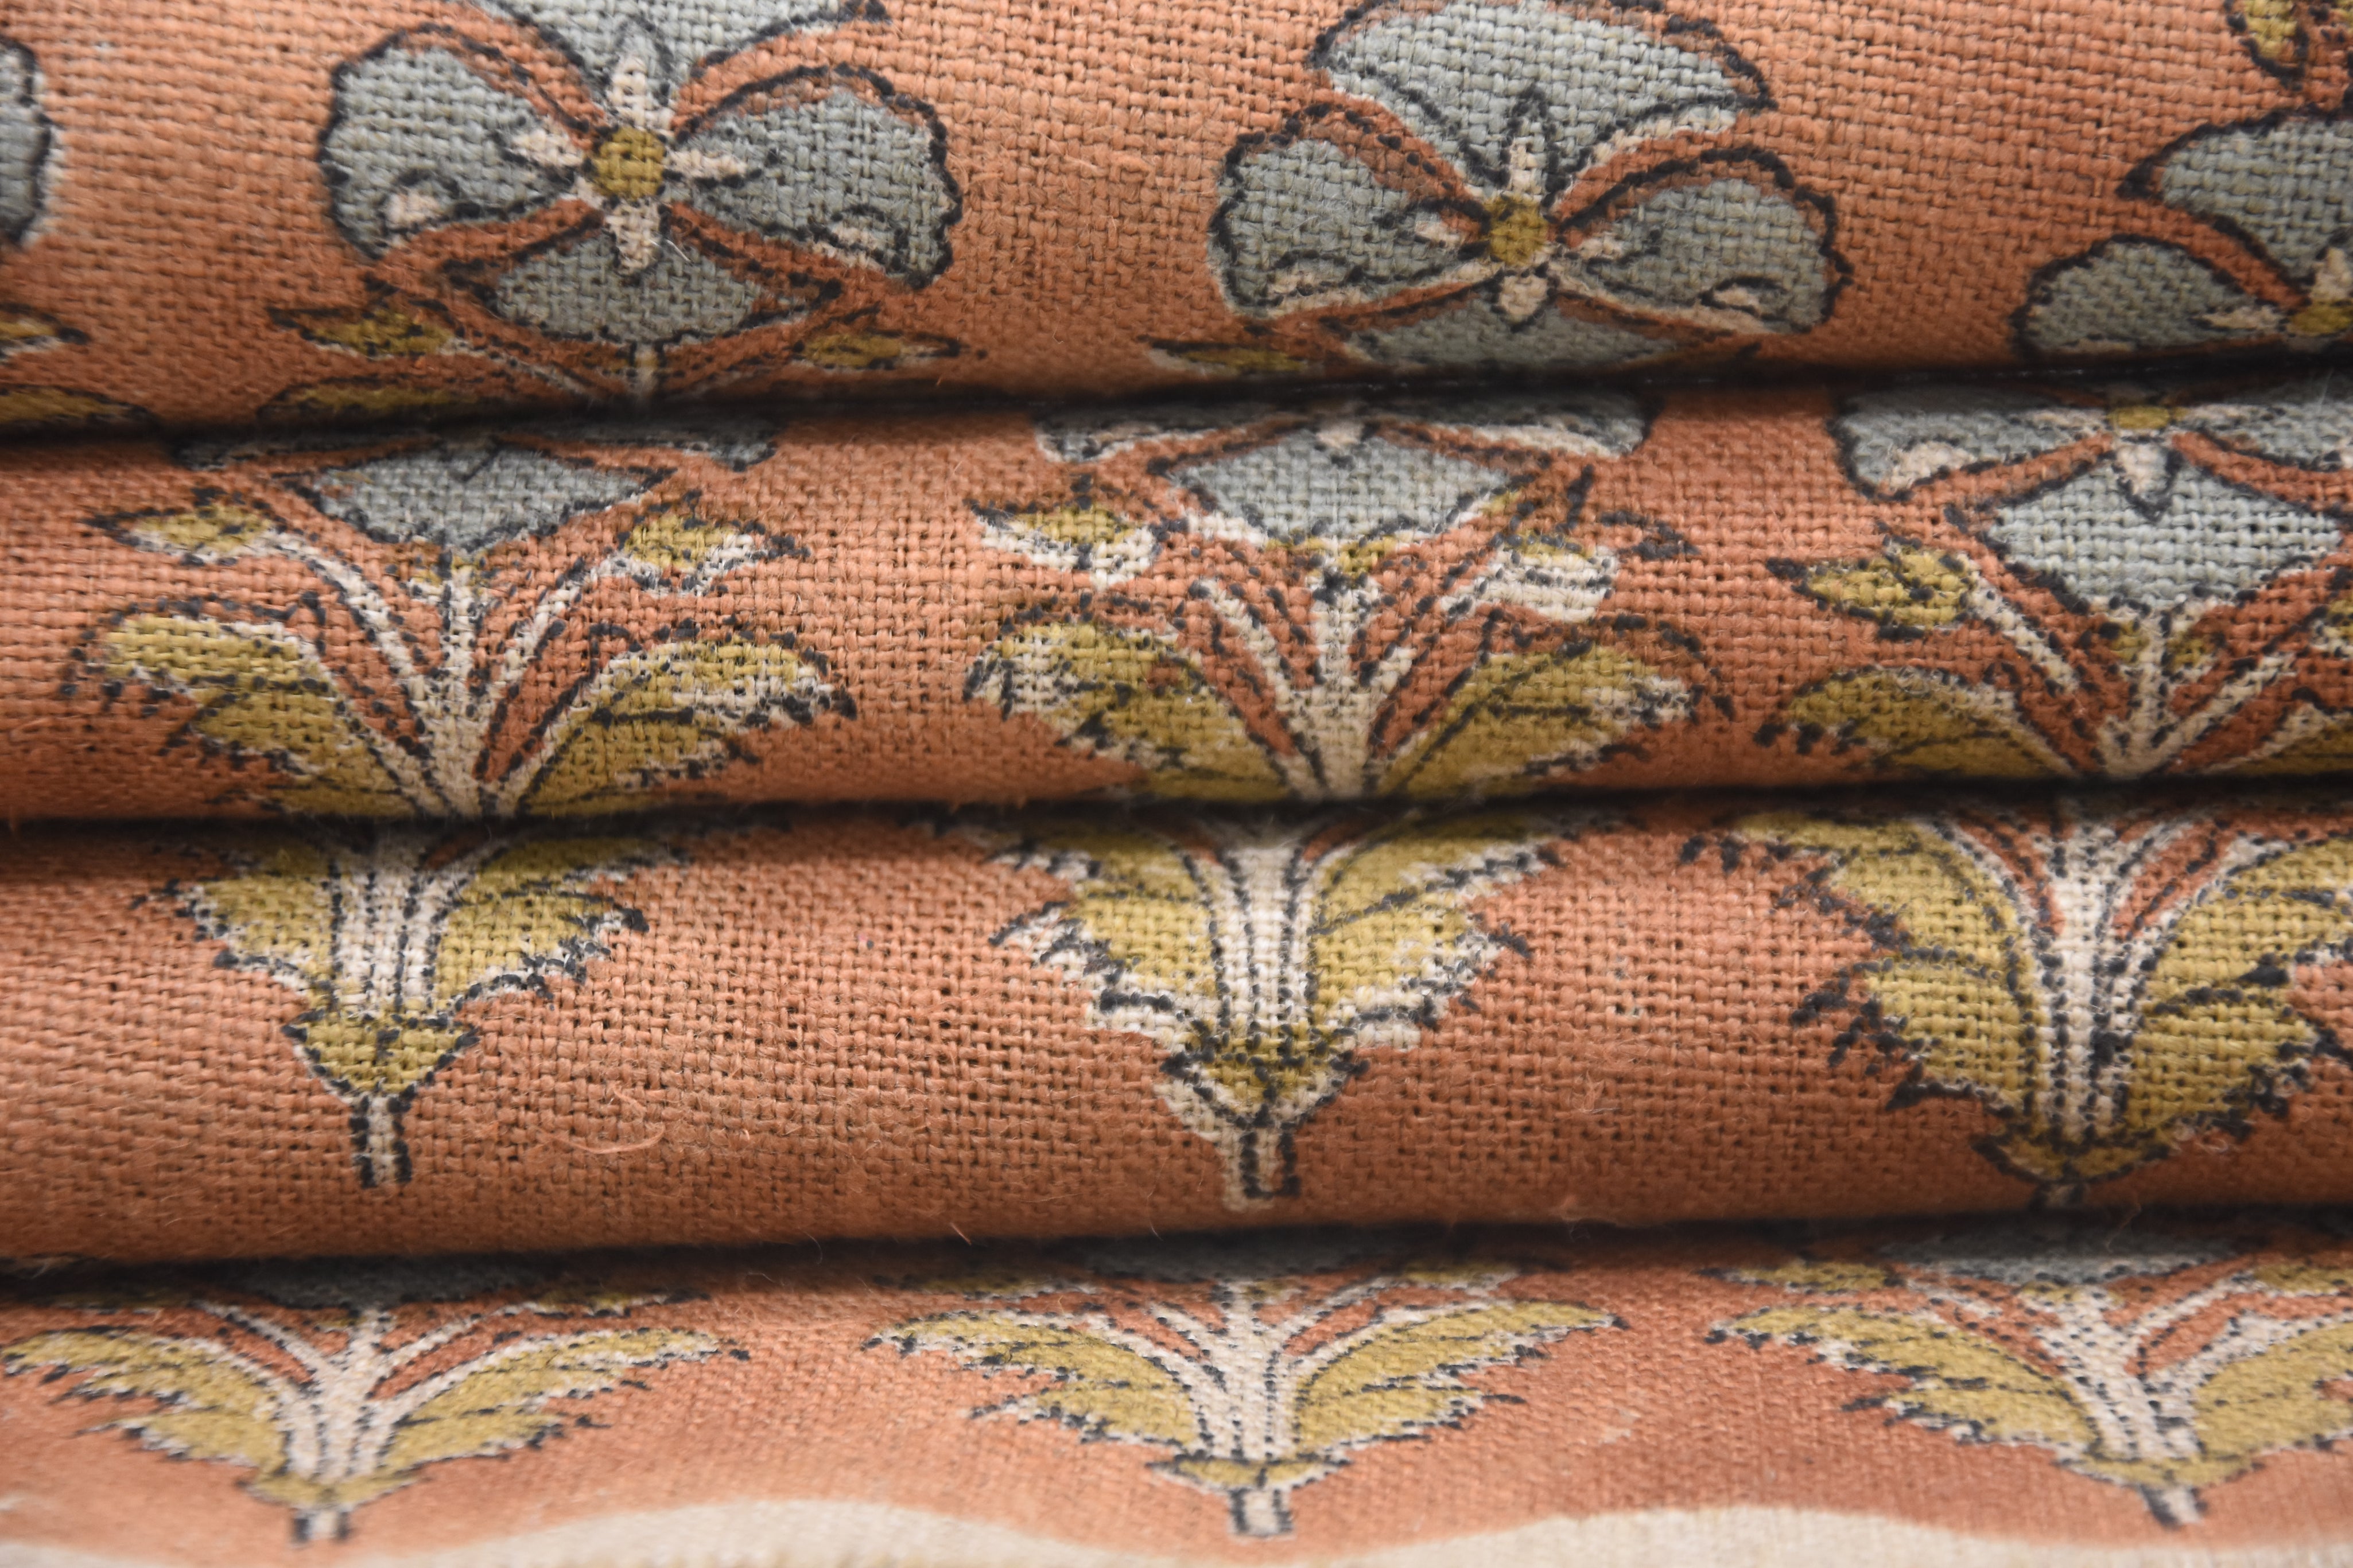 Hand block thick linen 58" Wide, Indian block print fabric, linen cushion covers, Curtains for home, Floral print - MOR MUKUT